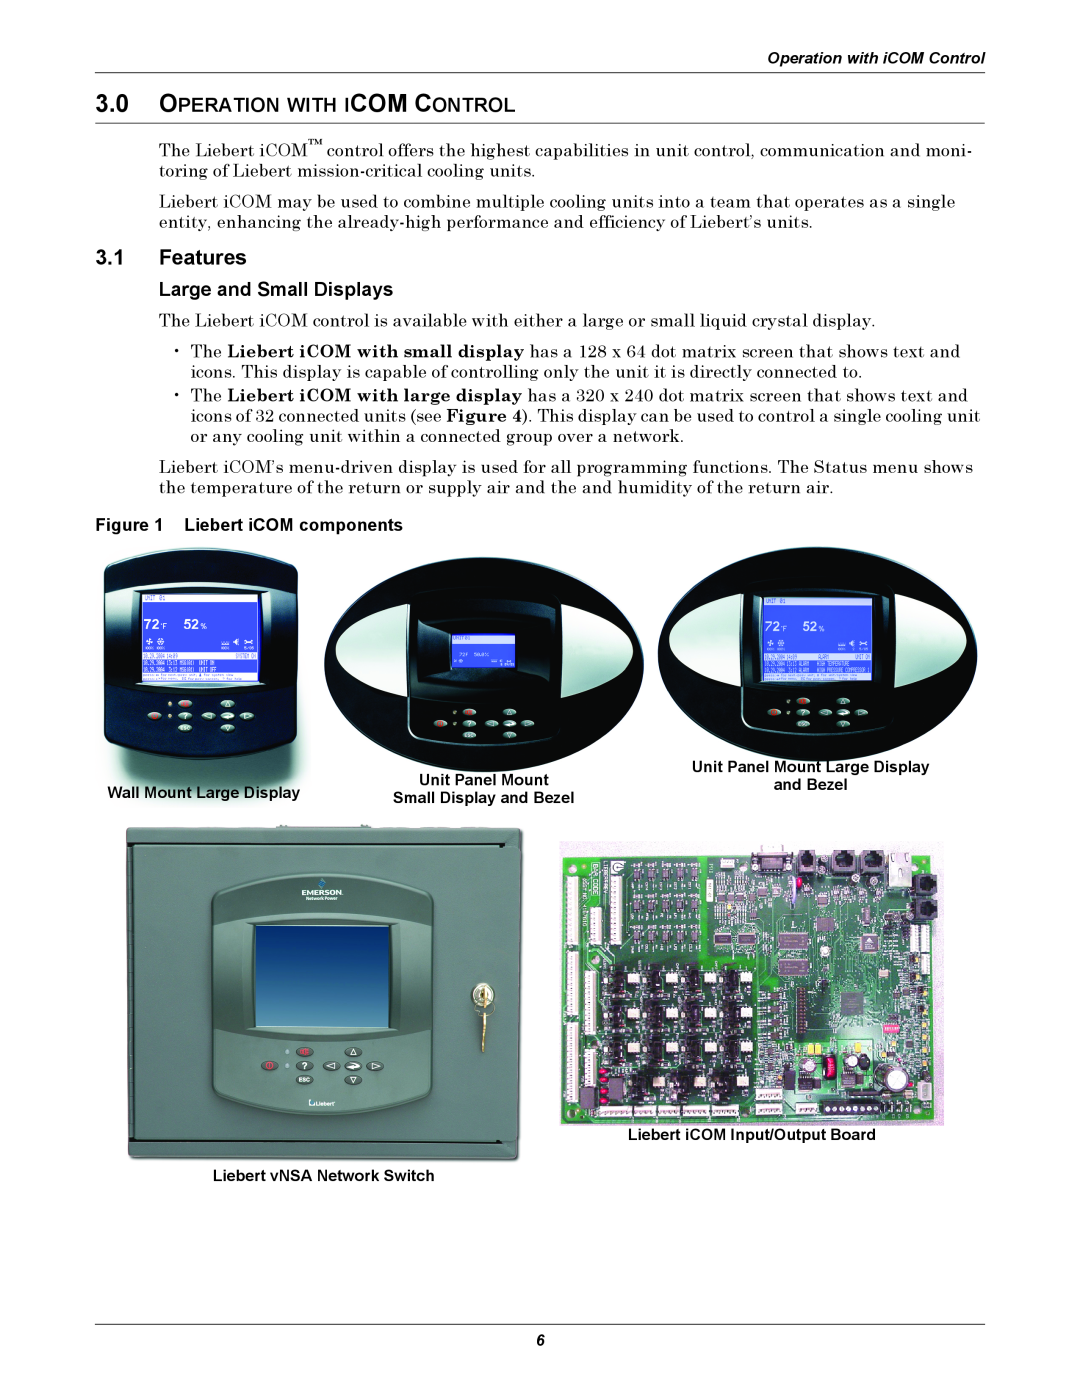 Emerson 3000/ITR manual 3.1Features, 3.0OPERATION WITH ICOM CONTROL, Large and Small Displays, Liebert iCOM components 